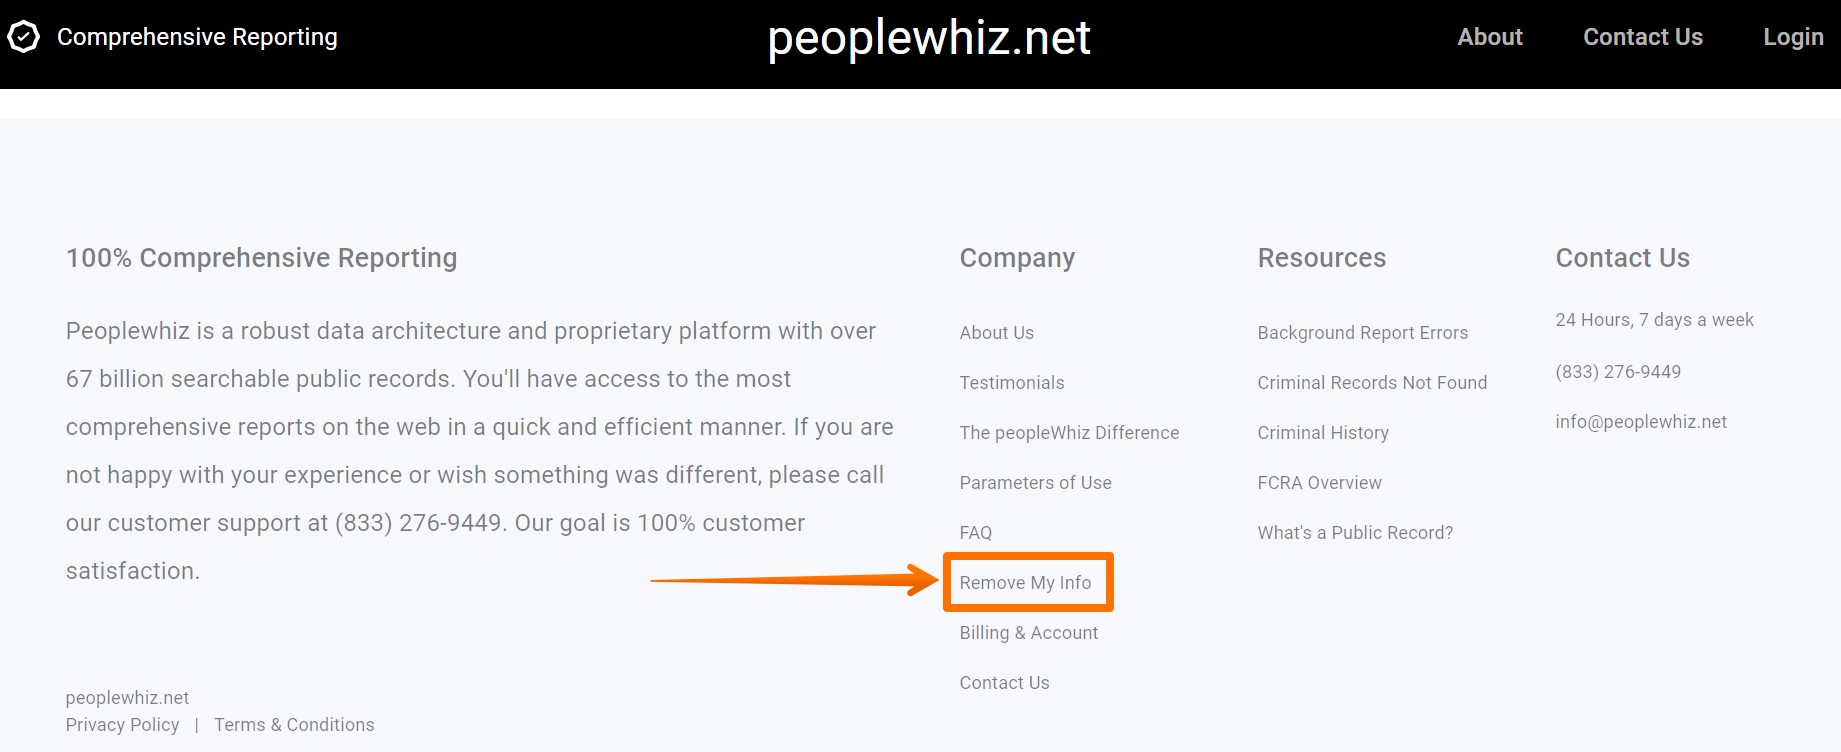 Open PeopleWhiz.net, scroll down and click the "Remove My Info" link to access the opt-out page